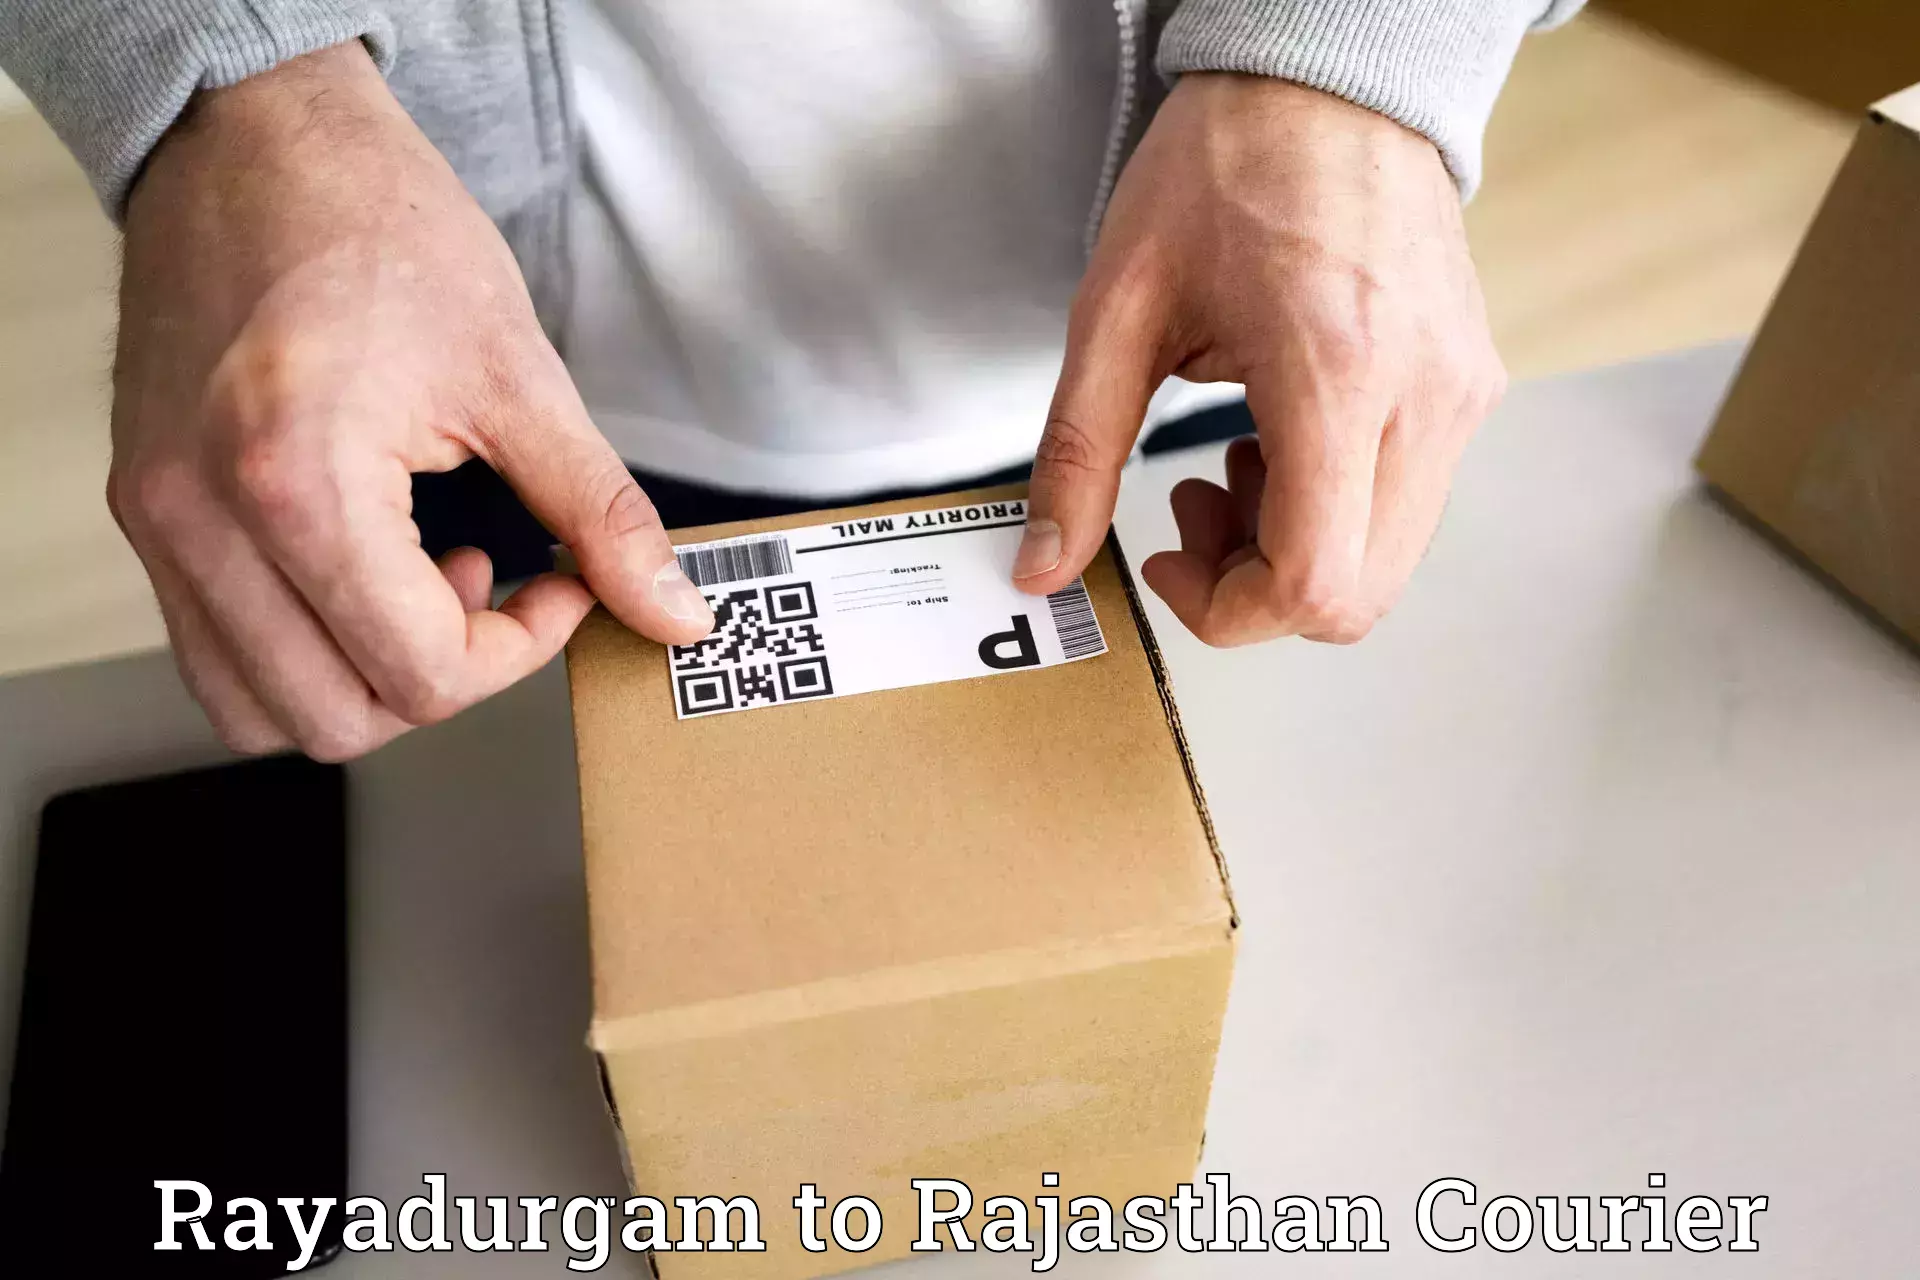 Reliable delivery network Rayadurgam to Jodhpur